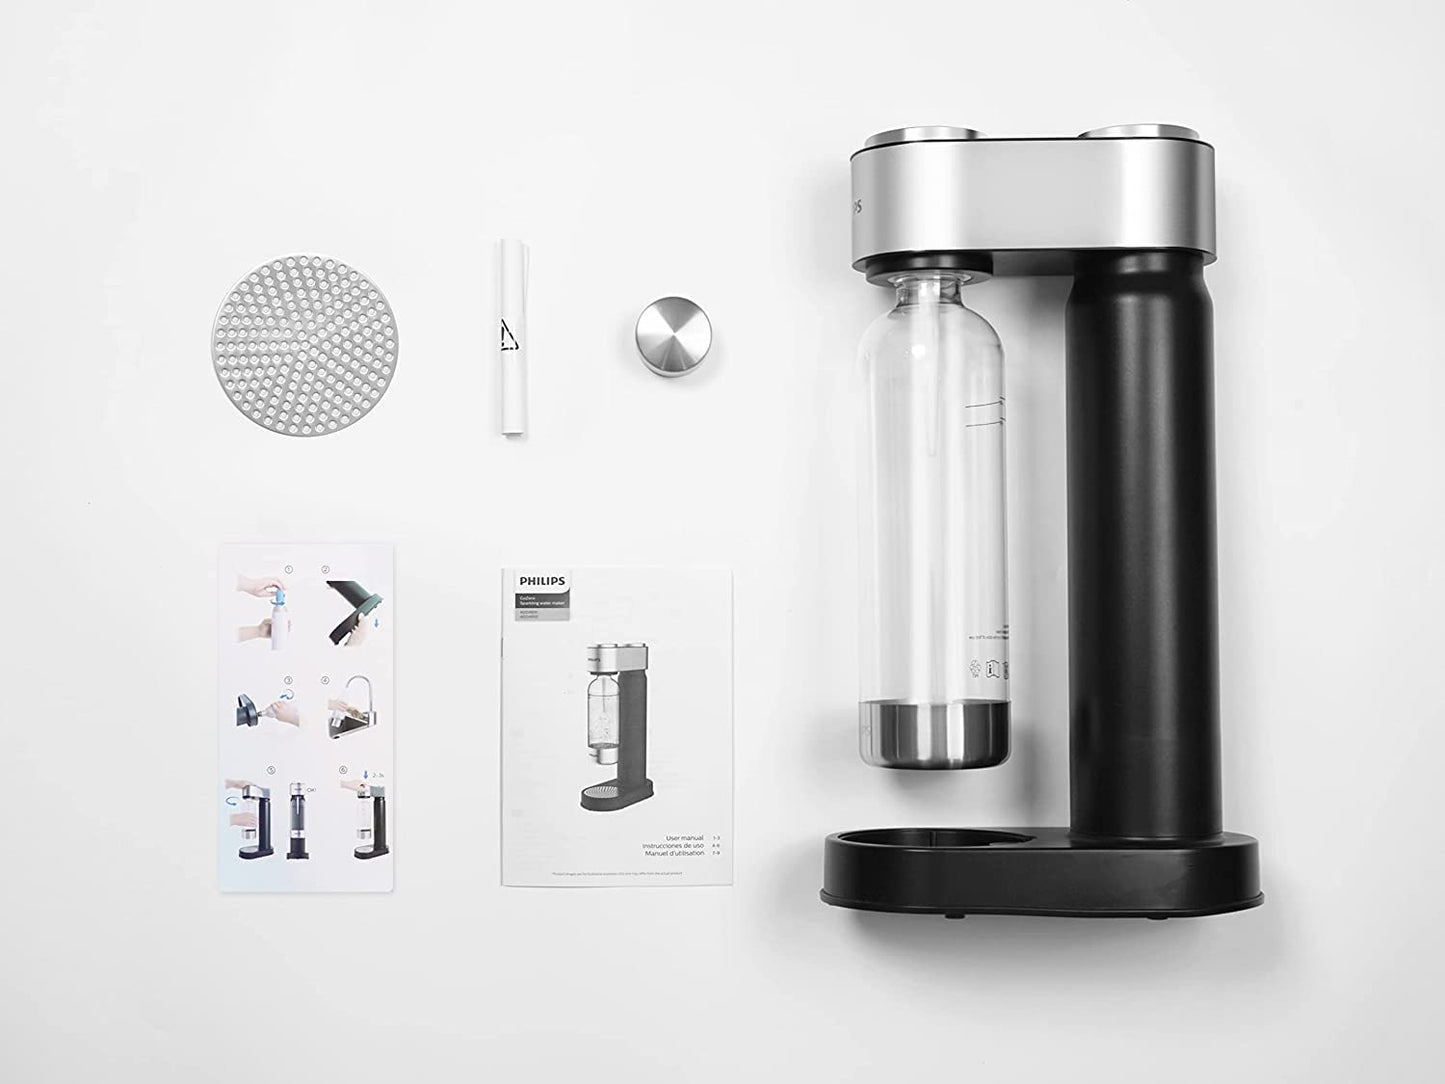 Philips Stainless Sparkling Water Maker Soda Maker Machine for Home Carbonating with BPA free PET 1L Carbonating Bottle, Compatible with Any Screw-in 60L CO2 Exchange Carbonator(NOT Included), Black